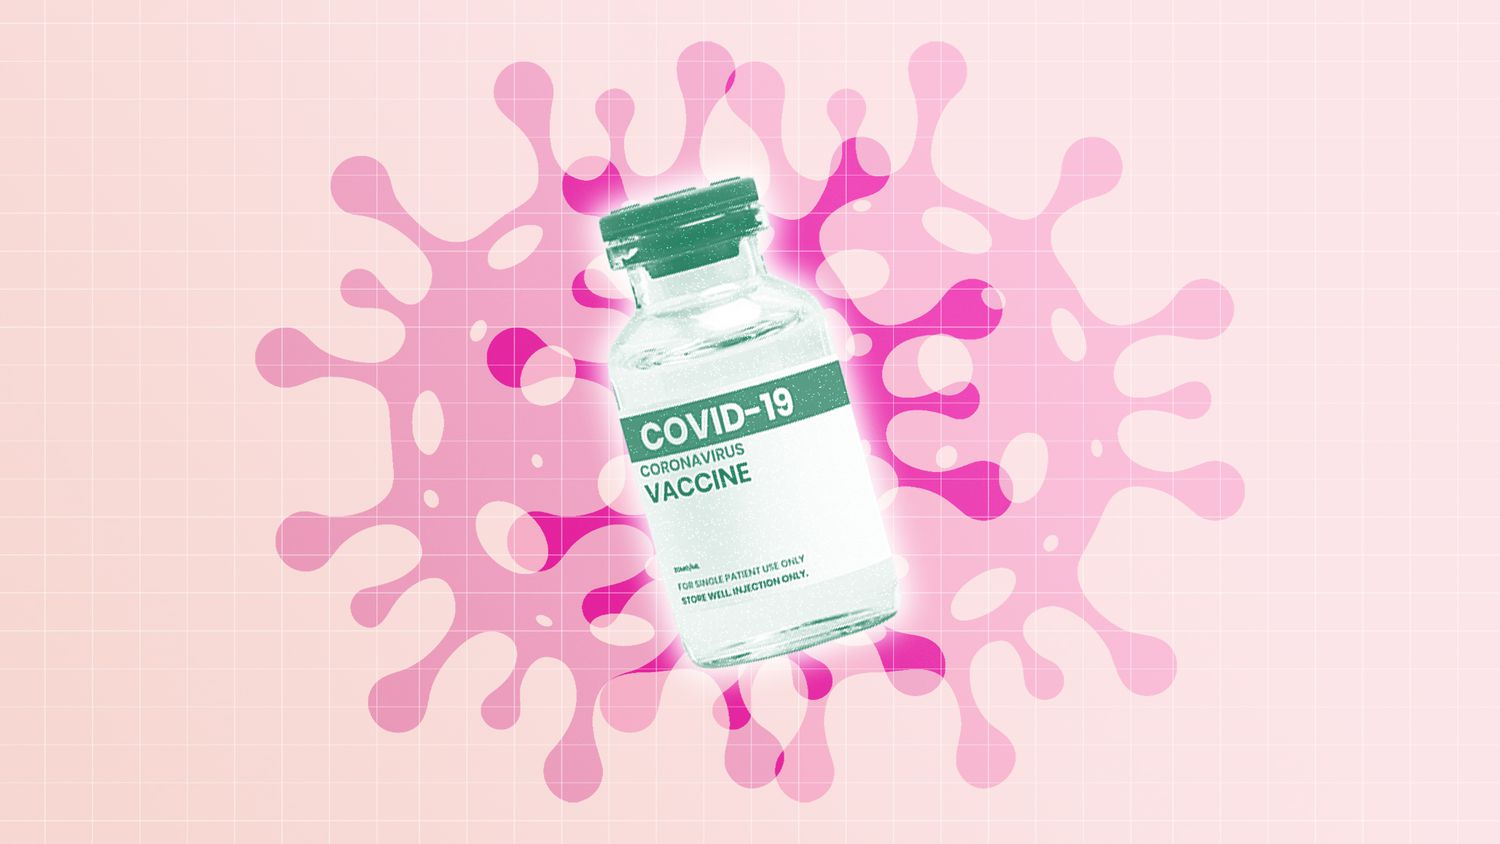 COVID-19 vaccine floating on designed background